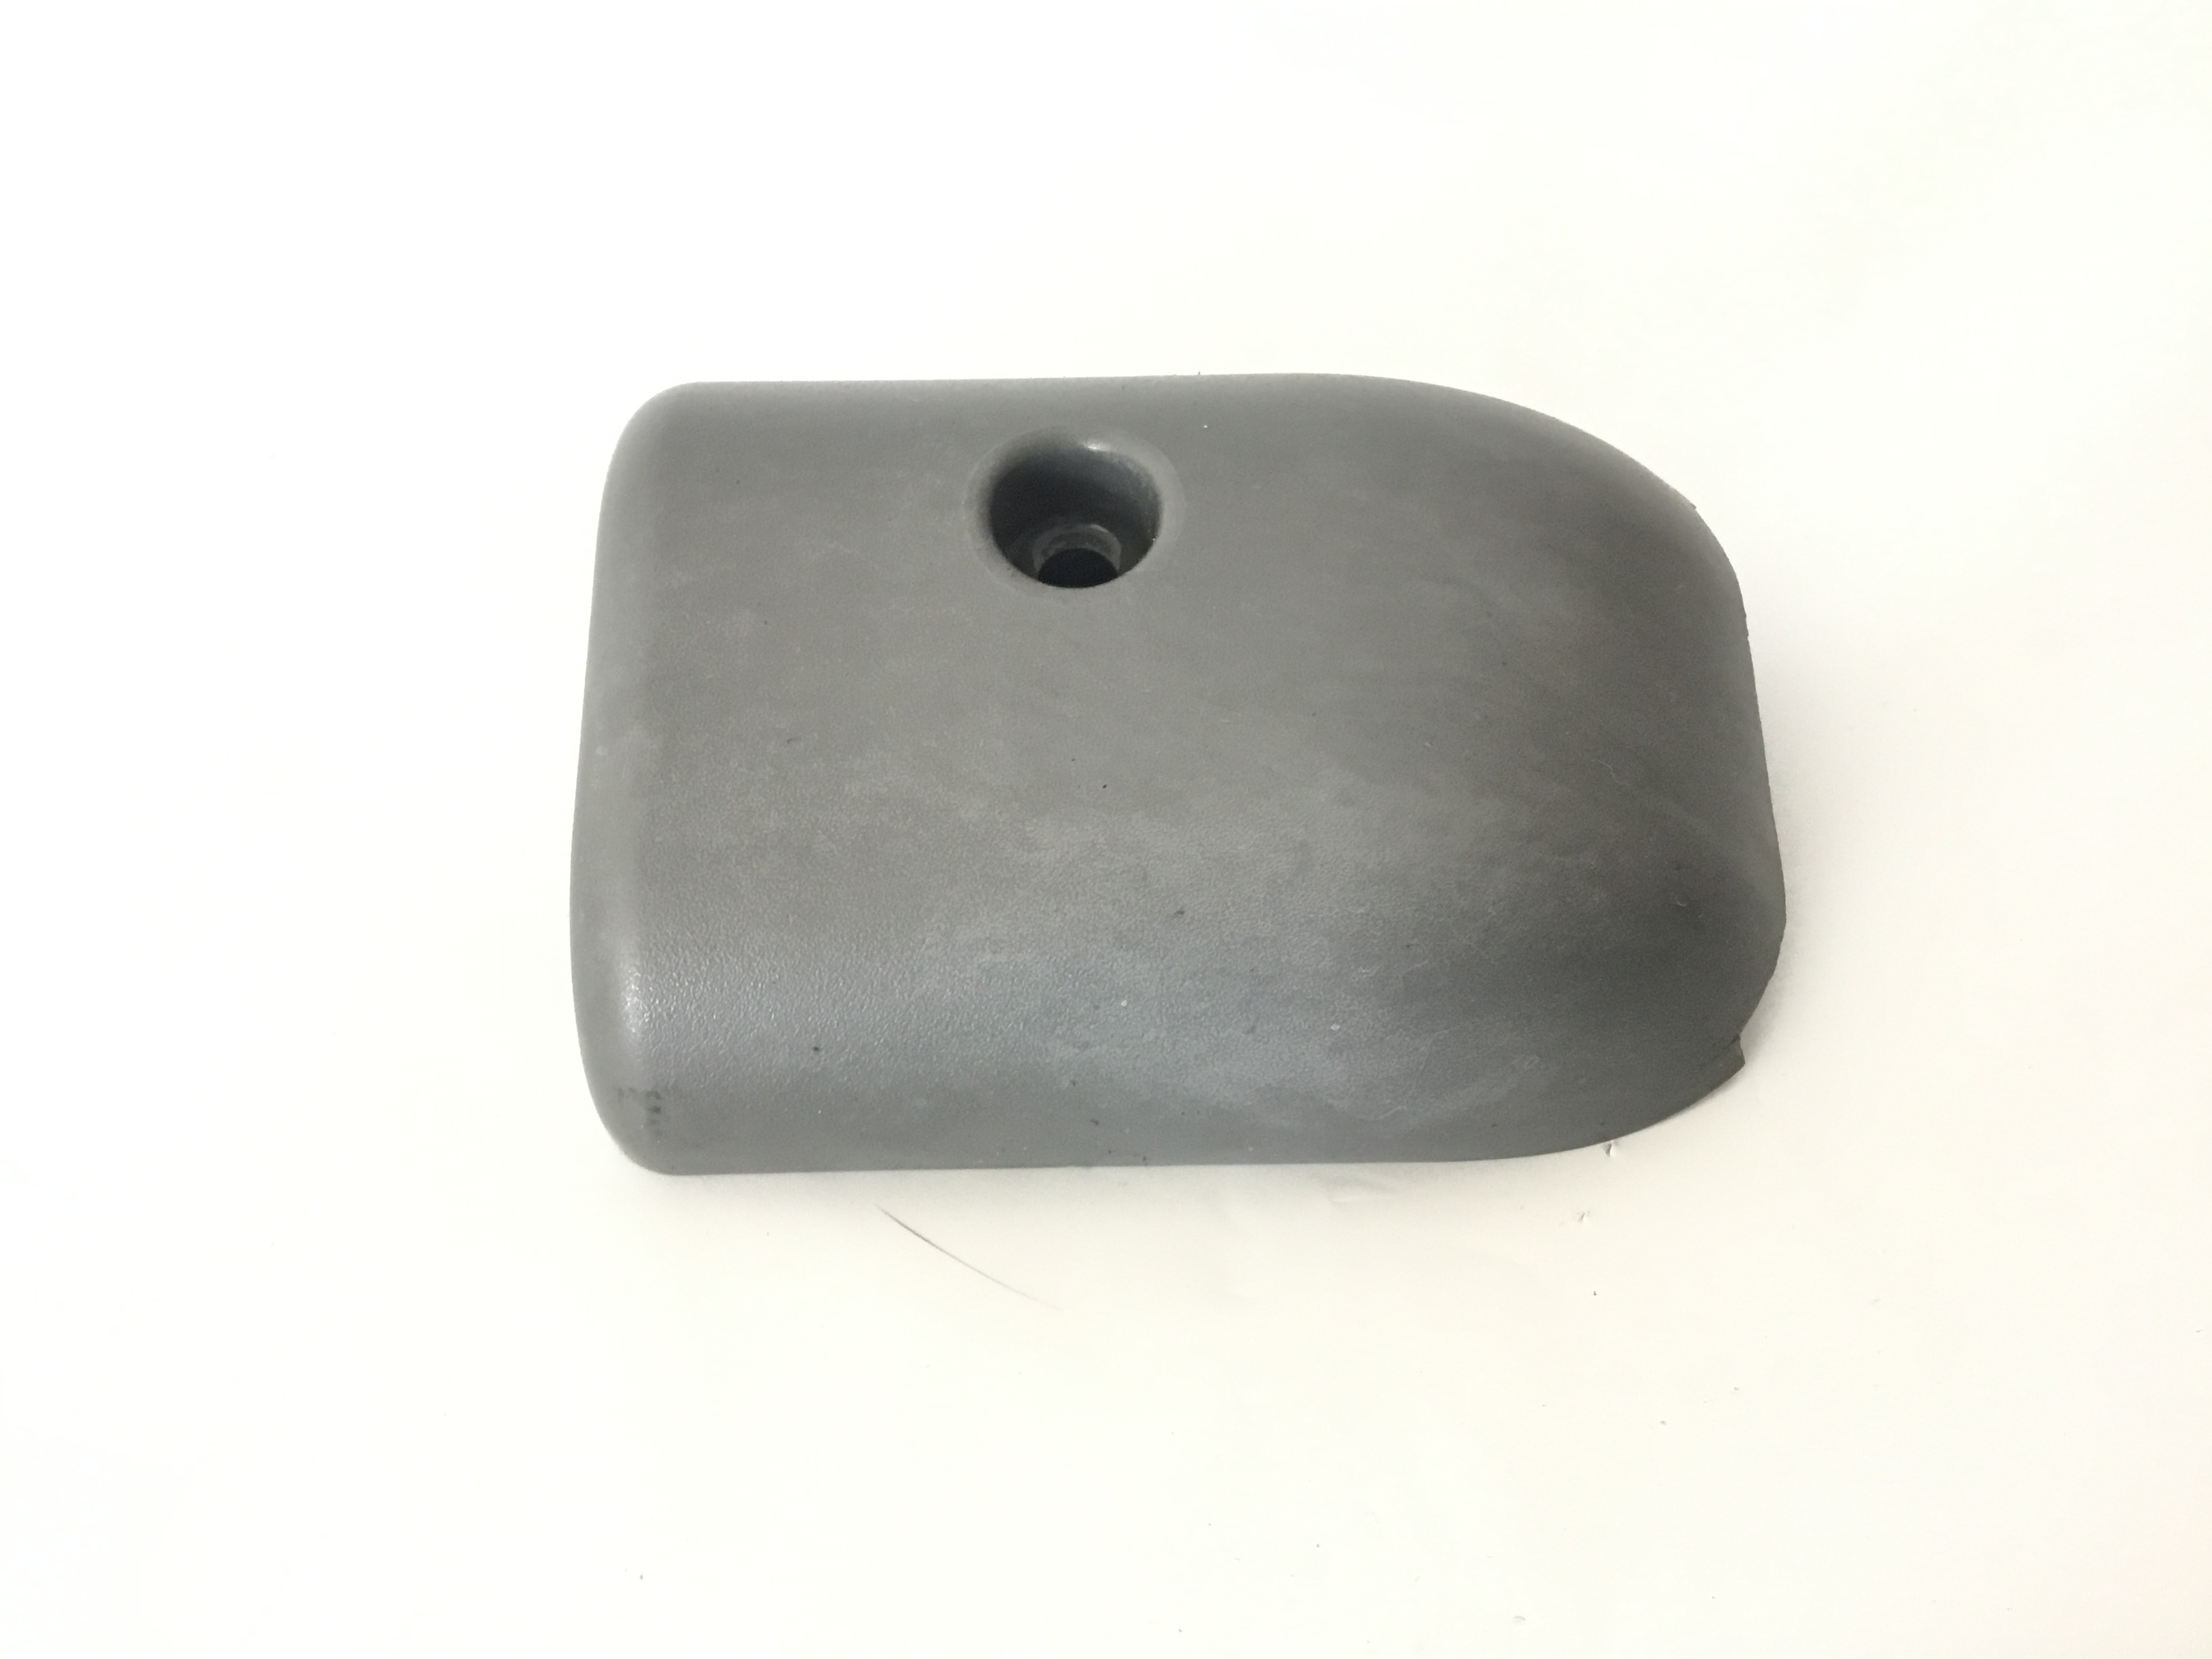 Known Part References 0K62-01008-0001 Left Bullhorn Dead Shaft Cover Other